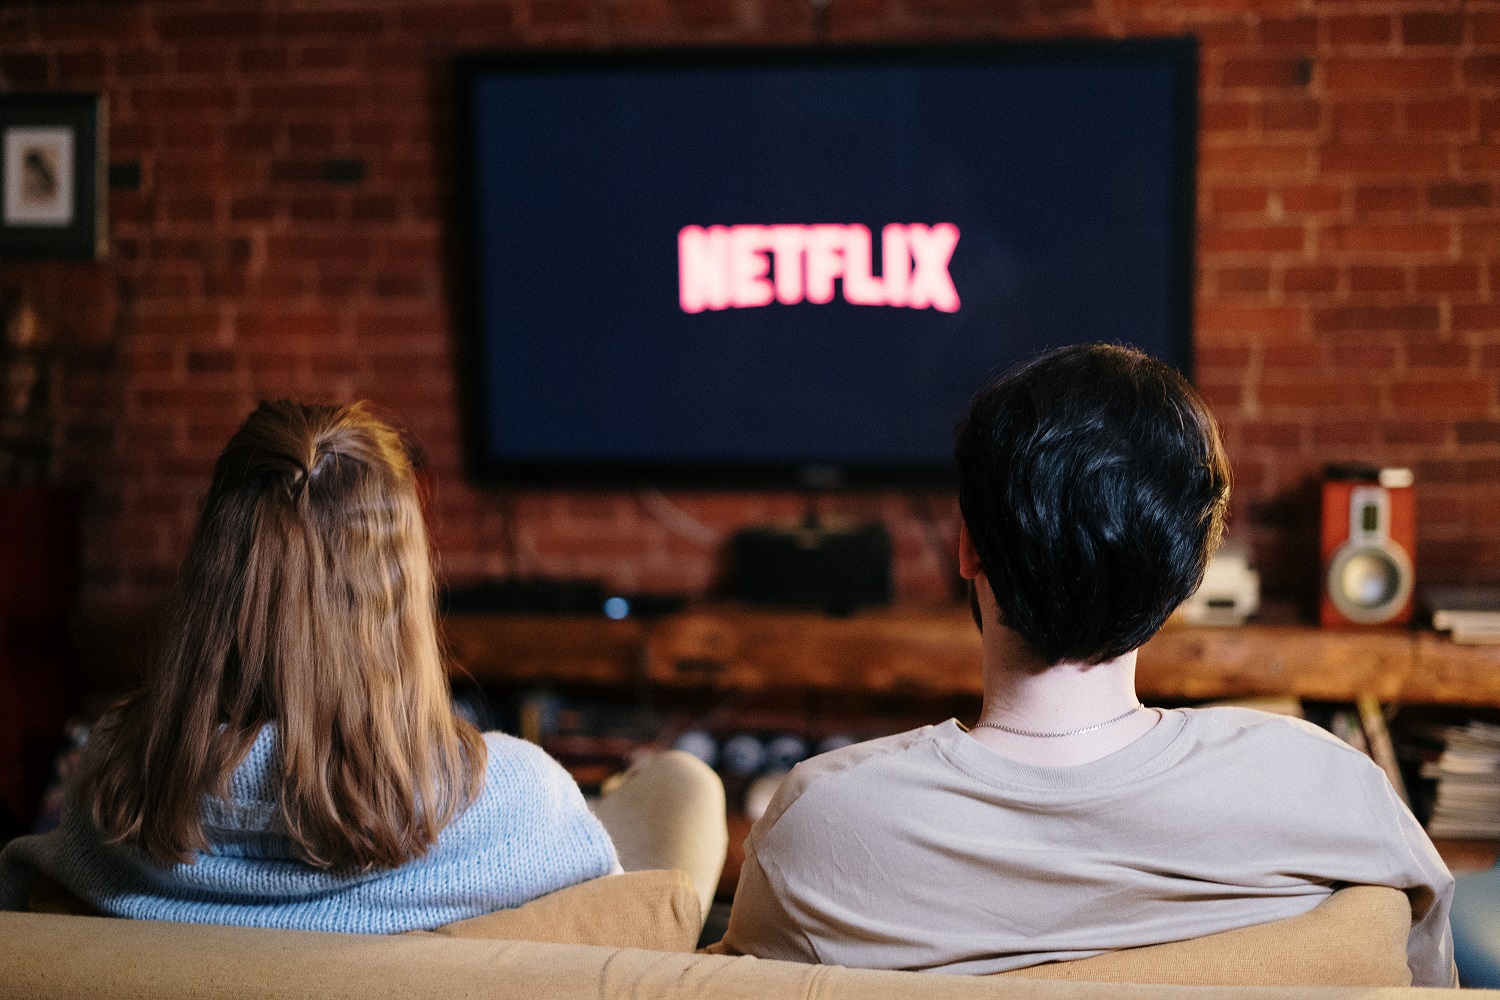 By utilizing cloud computing, Netflix can deliver its services to subscribers using various devices located around the globe and ensure your favorite series streams smoothly and in glorious full HD.